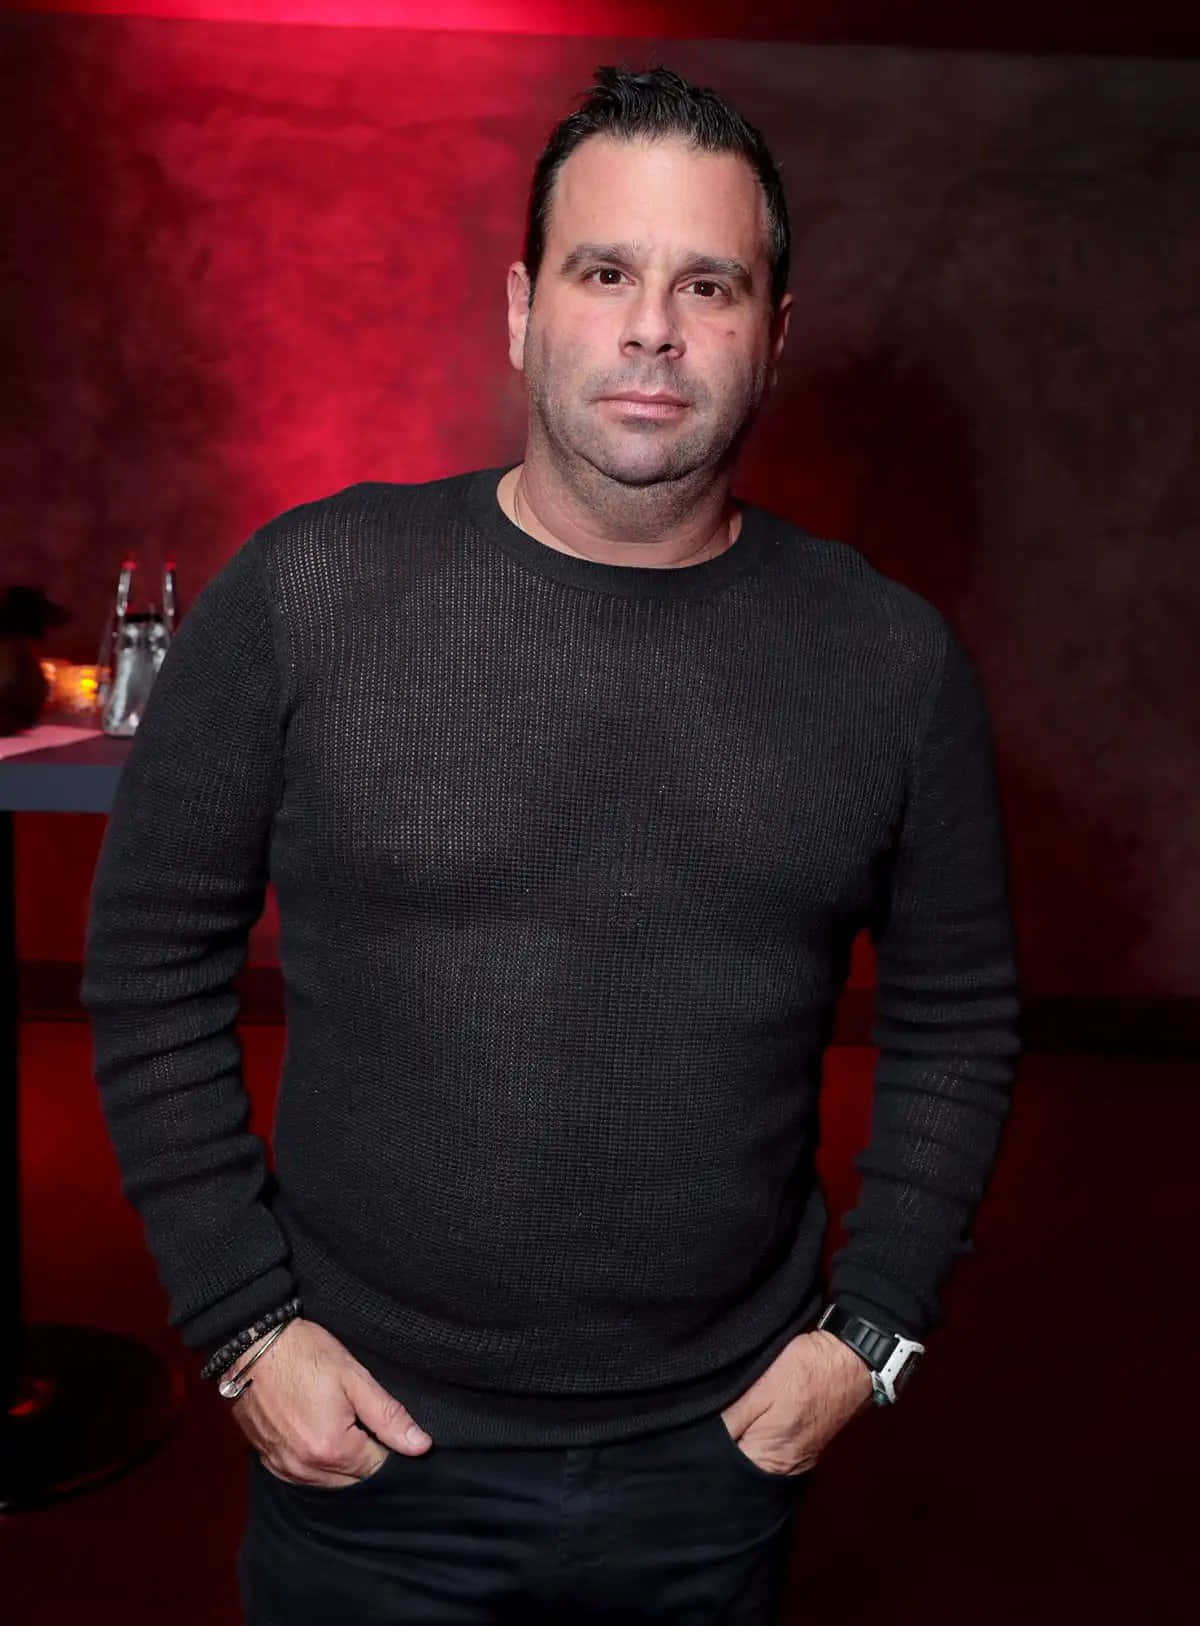 Producer Randall Emmett at the 10th annual GALECA Awards in Los Angeles